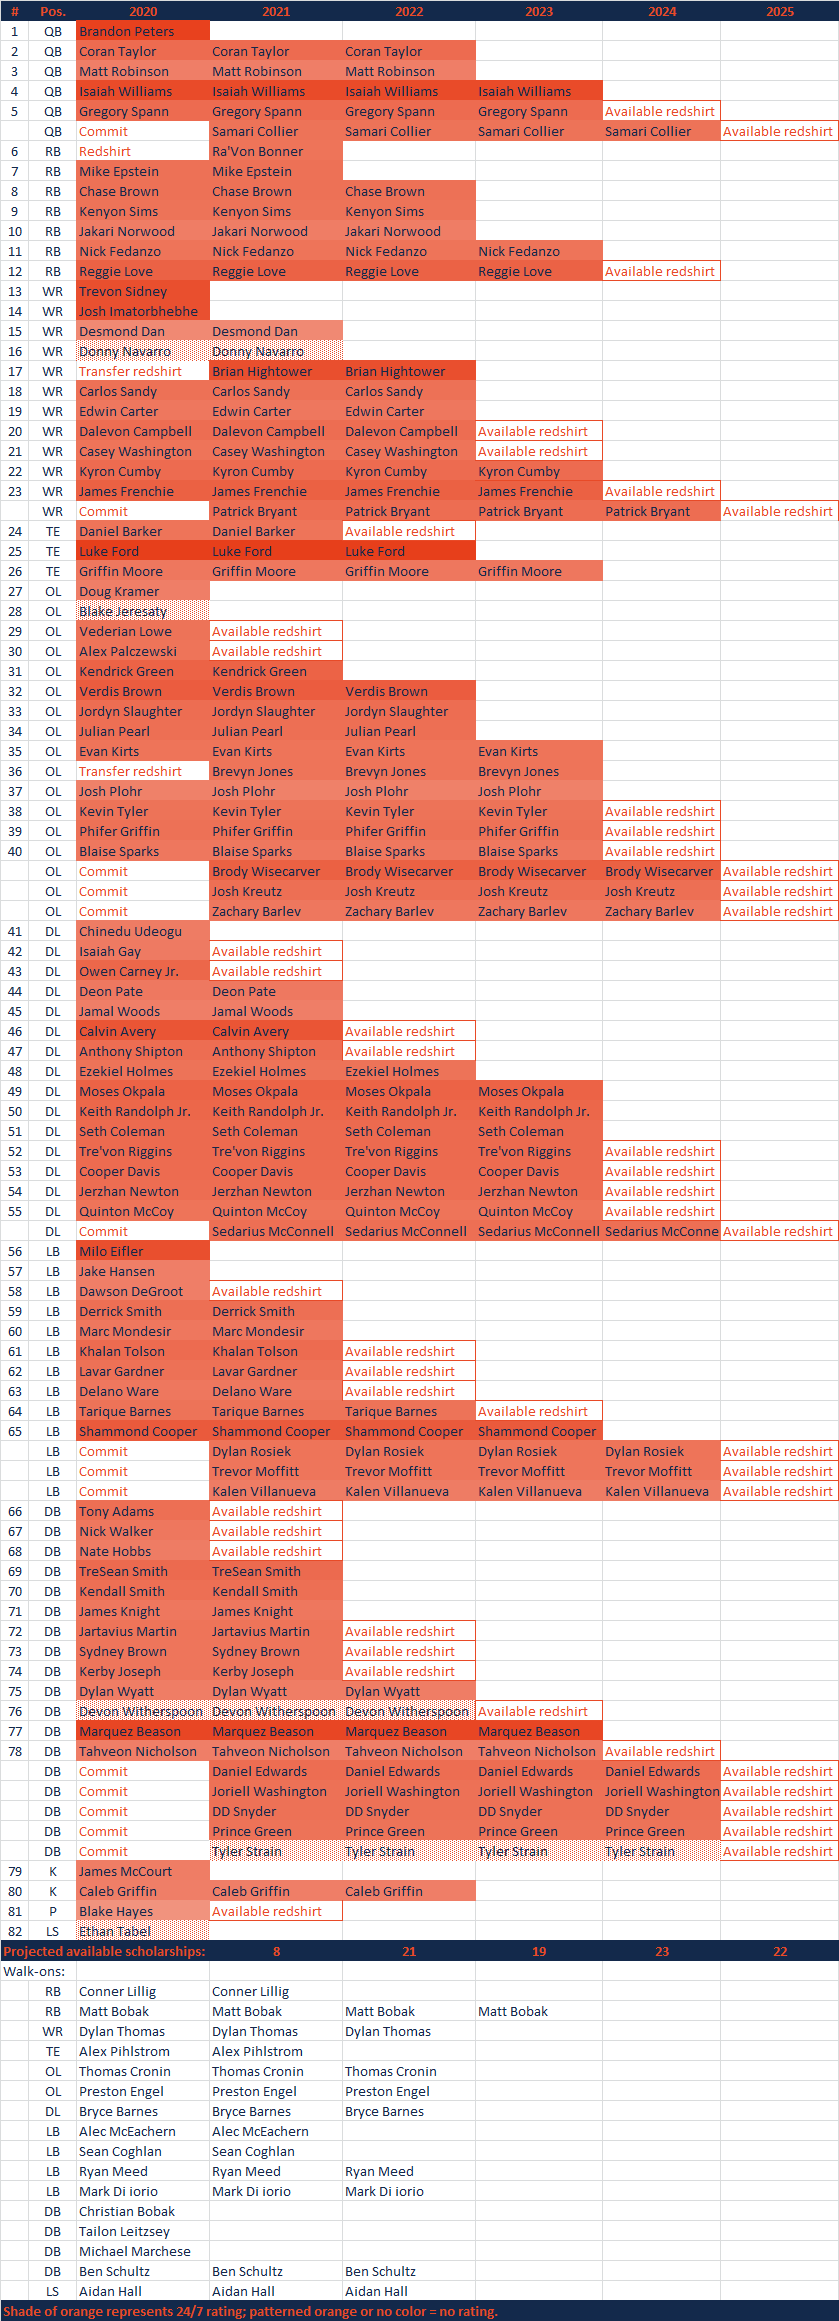 2020ScholarshipGrid0729.png